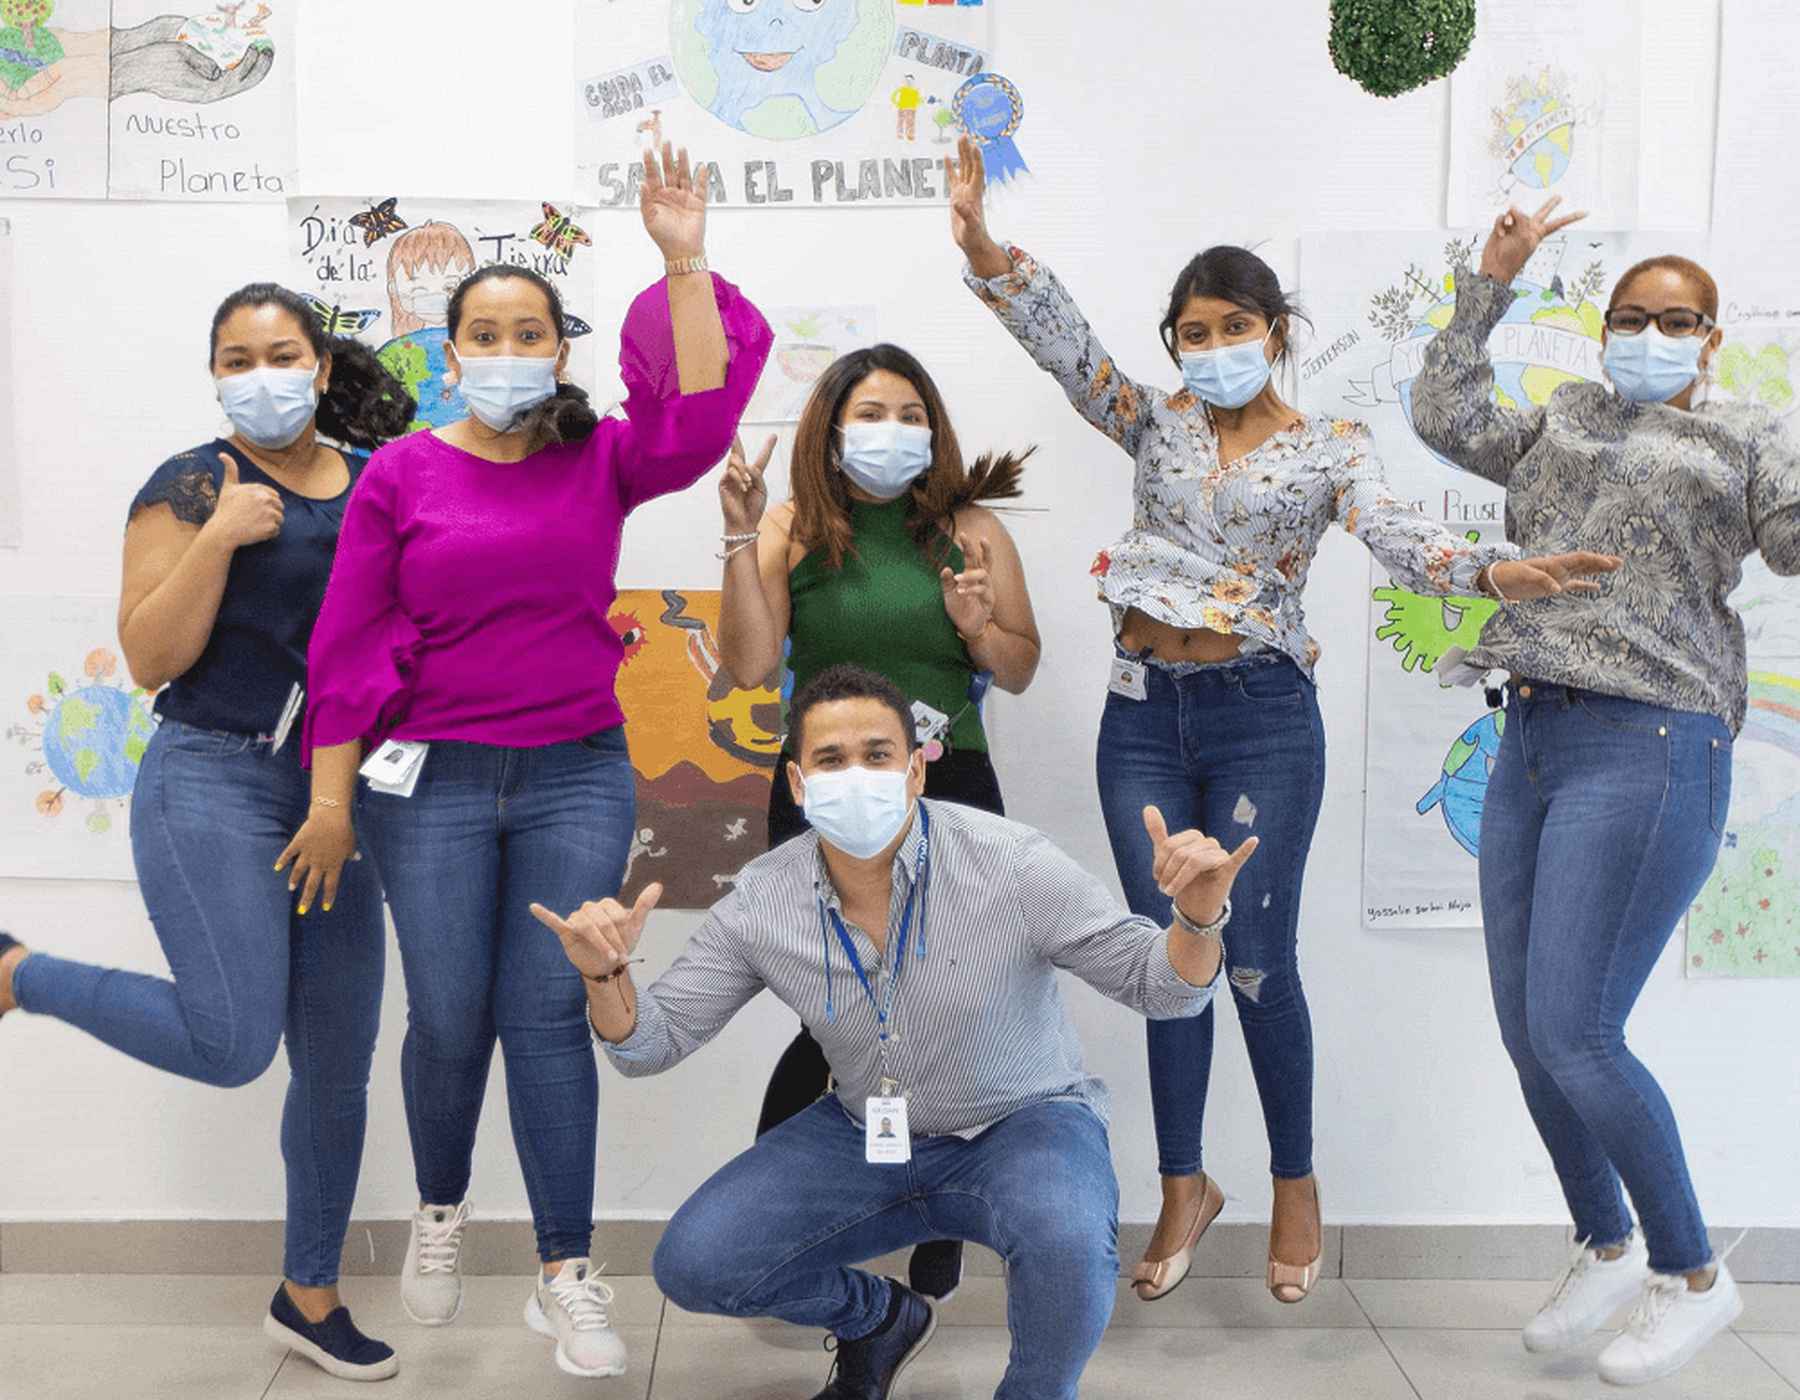 Six Gildan employees in Honduras are jumping. There are Earth Day drawings posted in the background.